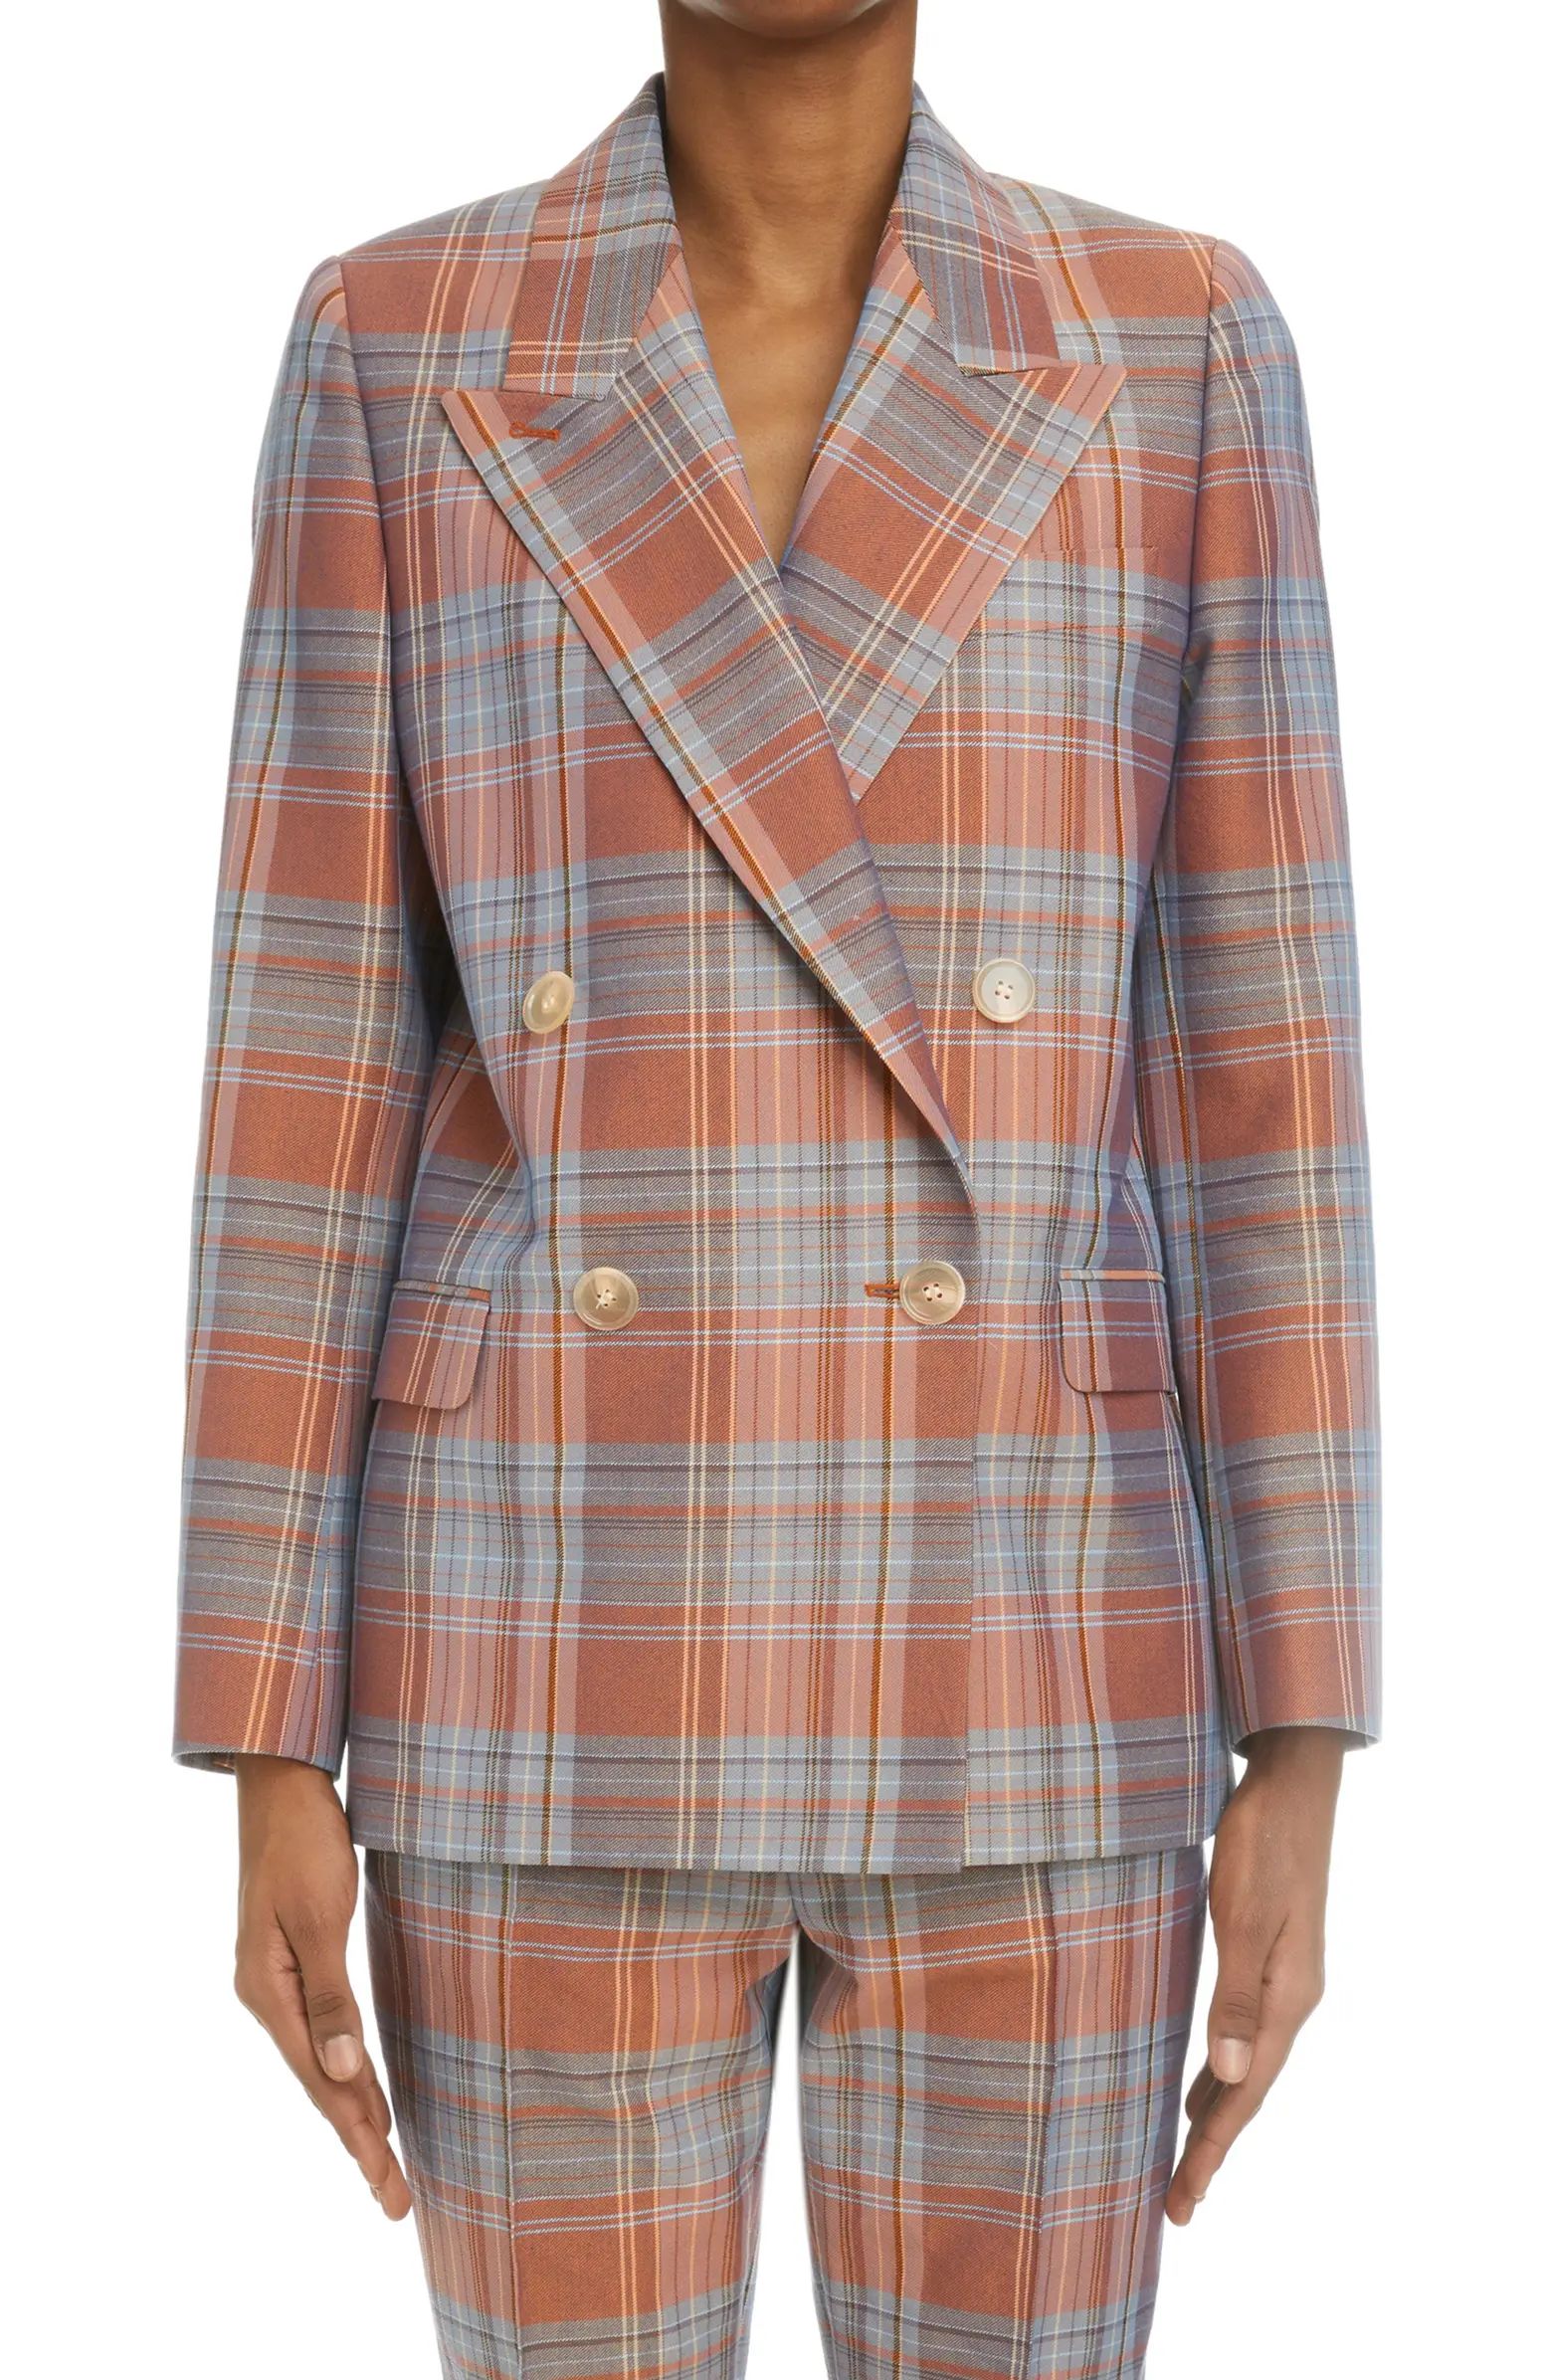 Acne Studios Janny Plaid Double Breasted Suit Jacket | Nordstrom | Nordstrom